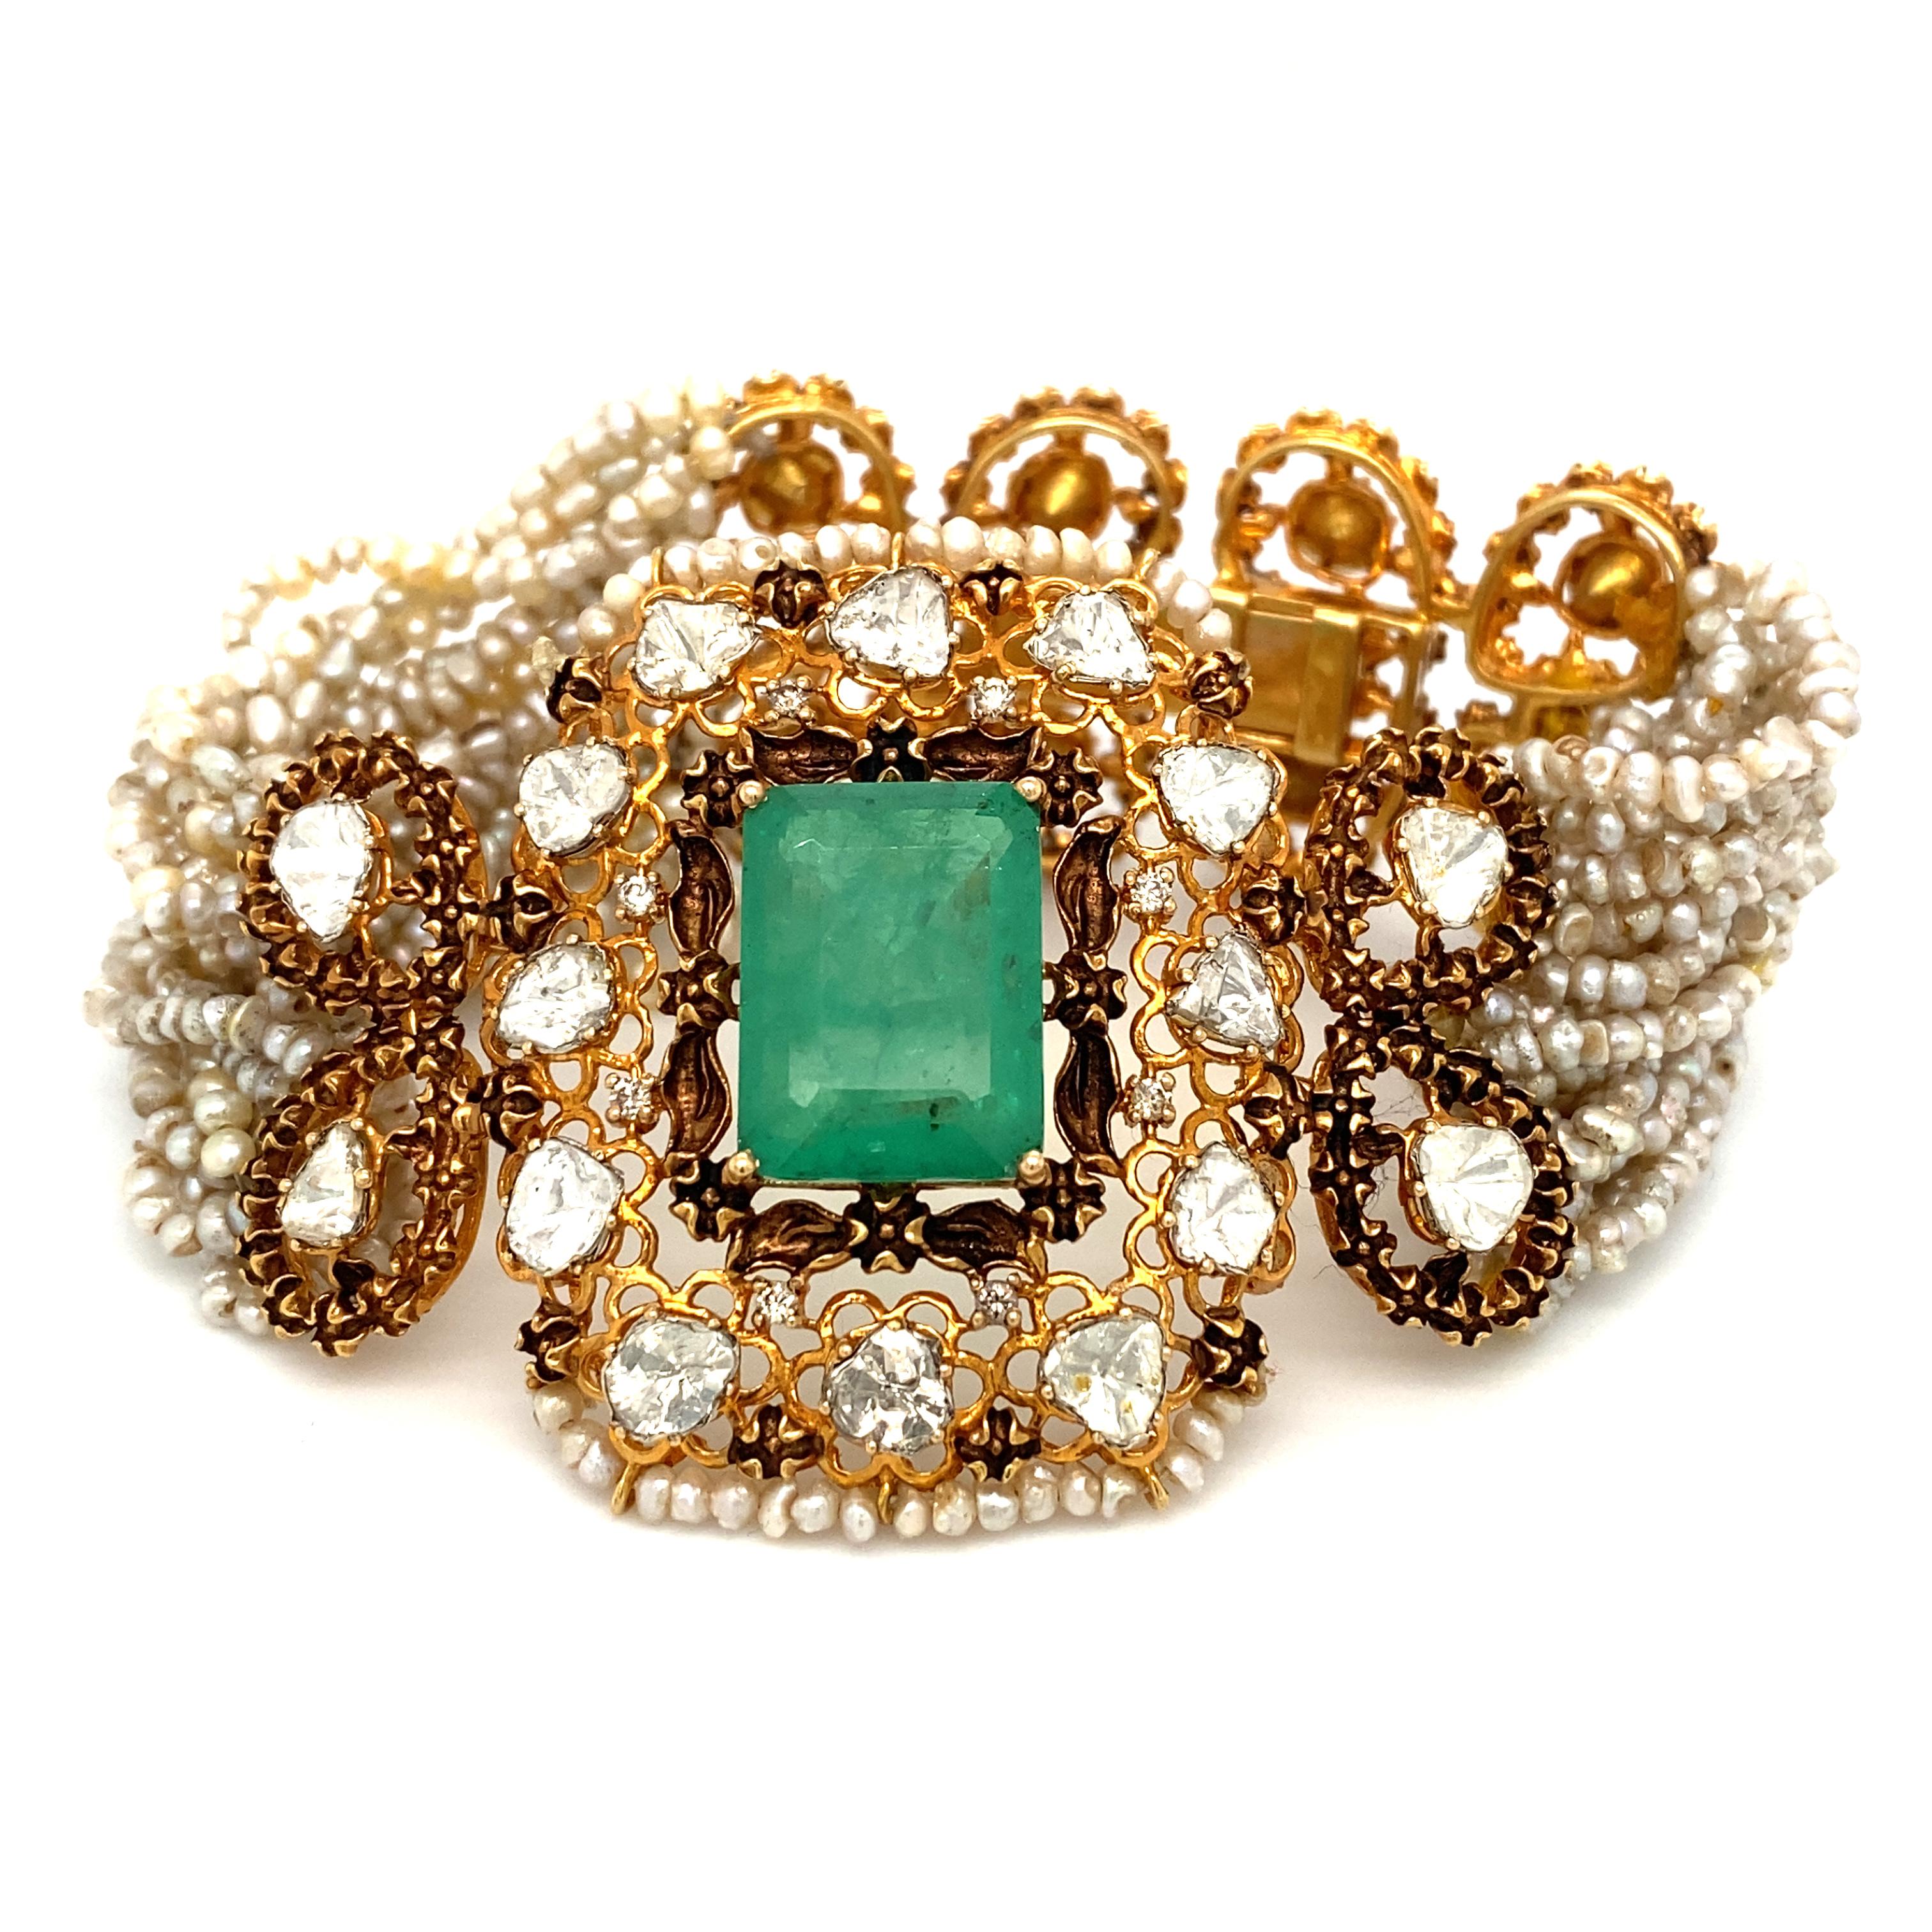 Item Details: This Victorian style bracelet has numerous rice pearl strands, foil backed diamond accents and an emerald doublet in the center section, and is crafted in 14 karat gold. This bracelet is a Victorian revival piece from the 1950s and is